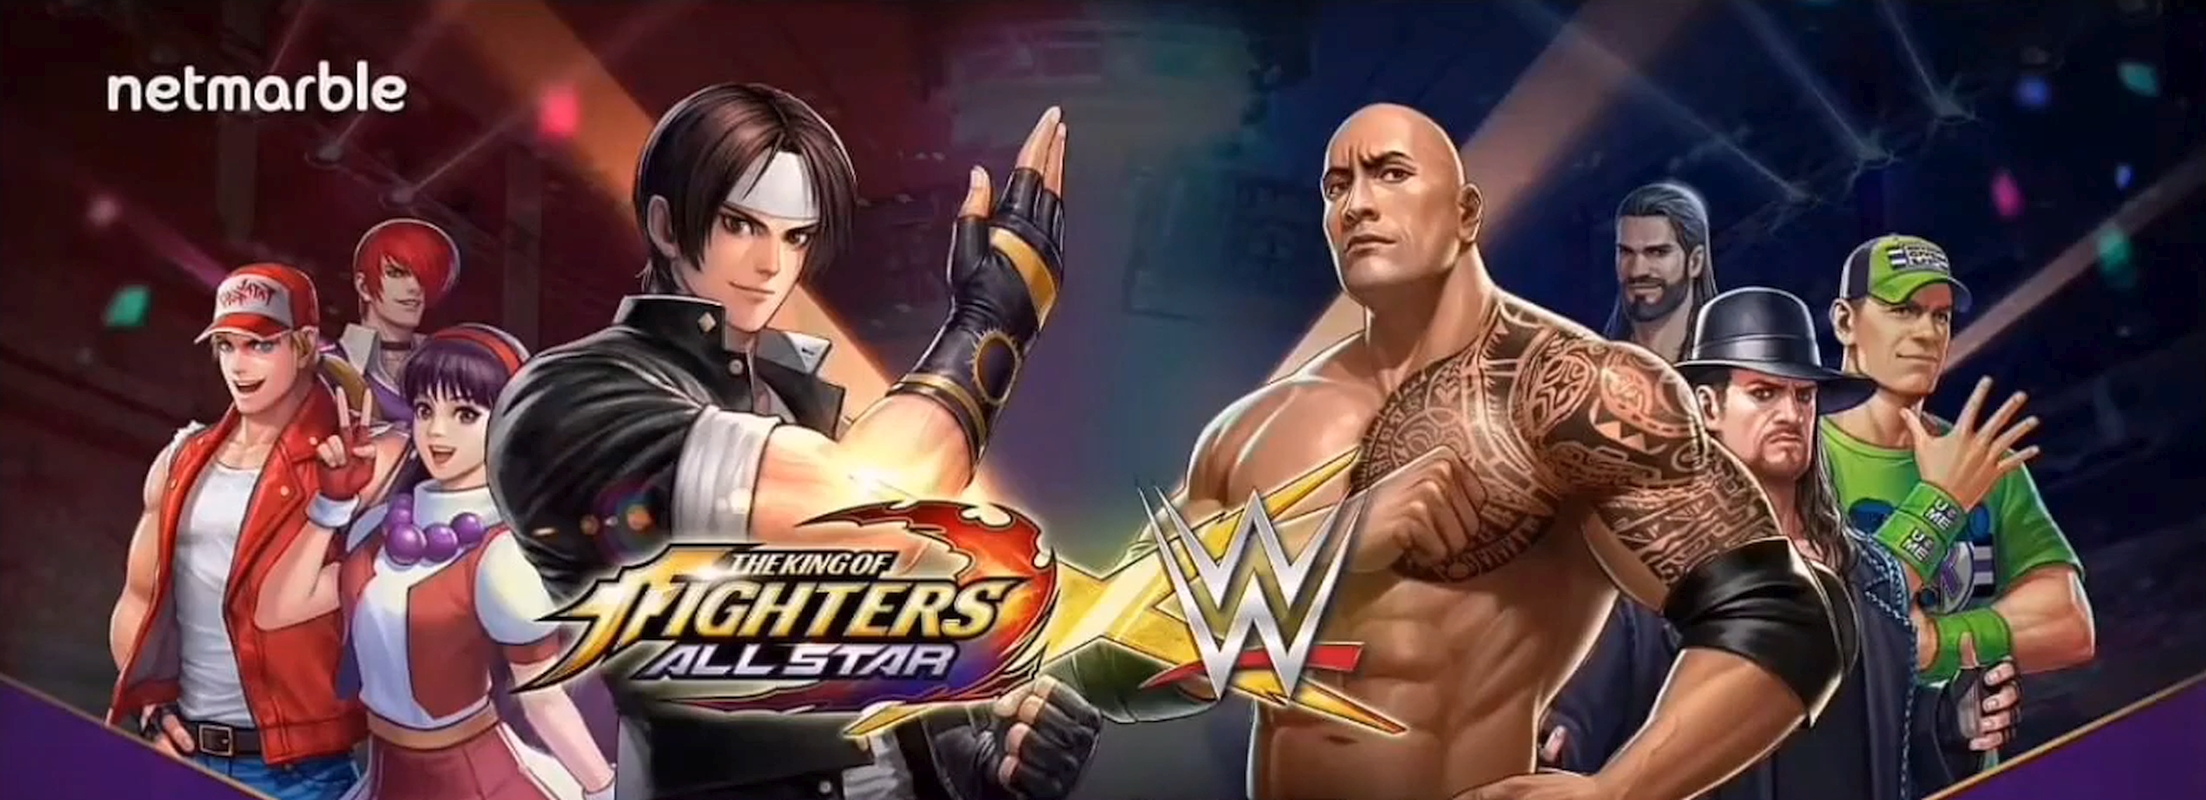 Netmarble Announces Upcoming The King of Fighters Allstar And WWE Collaboration